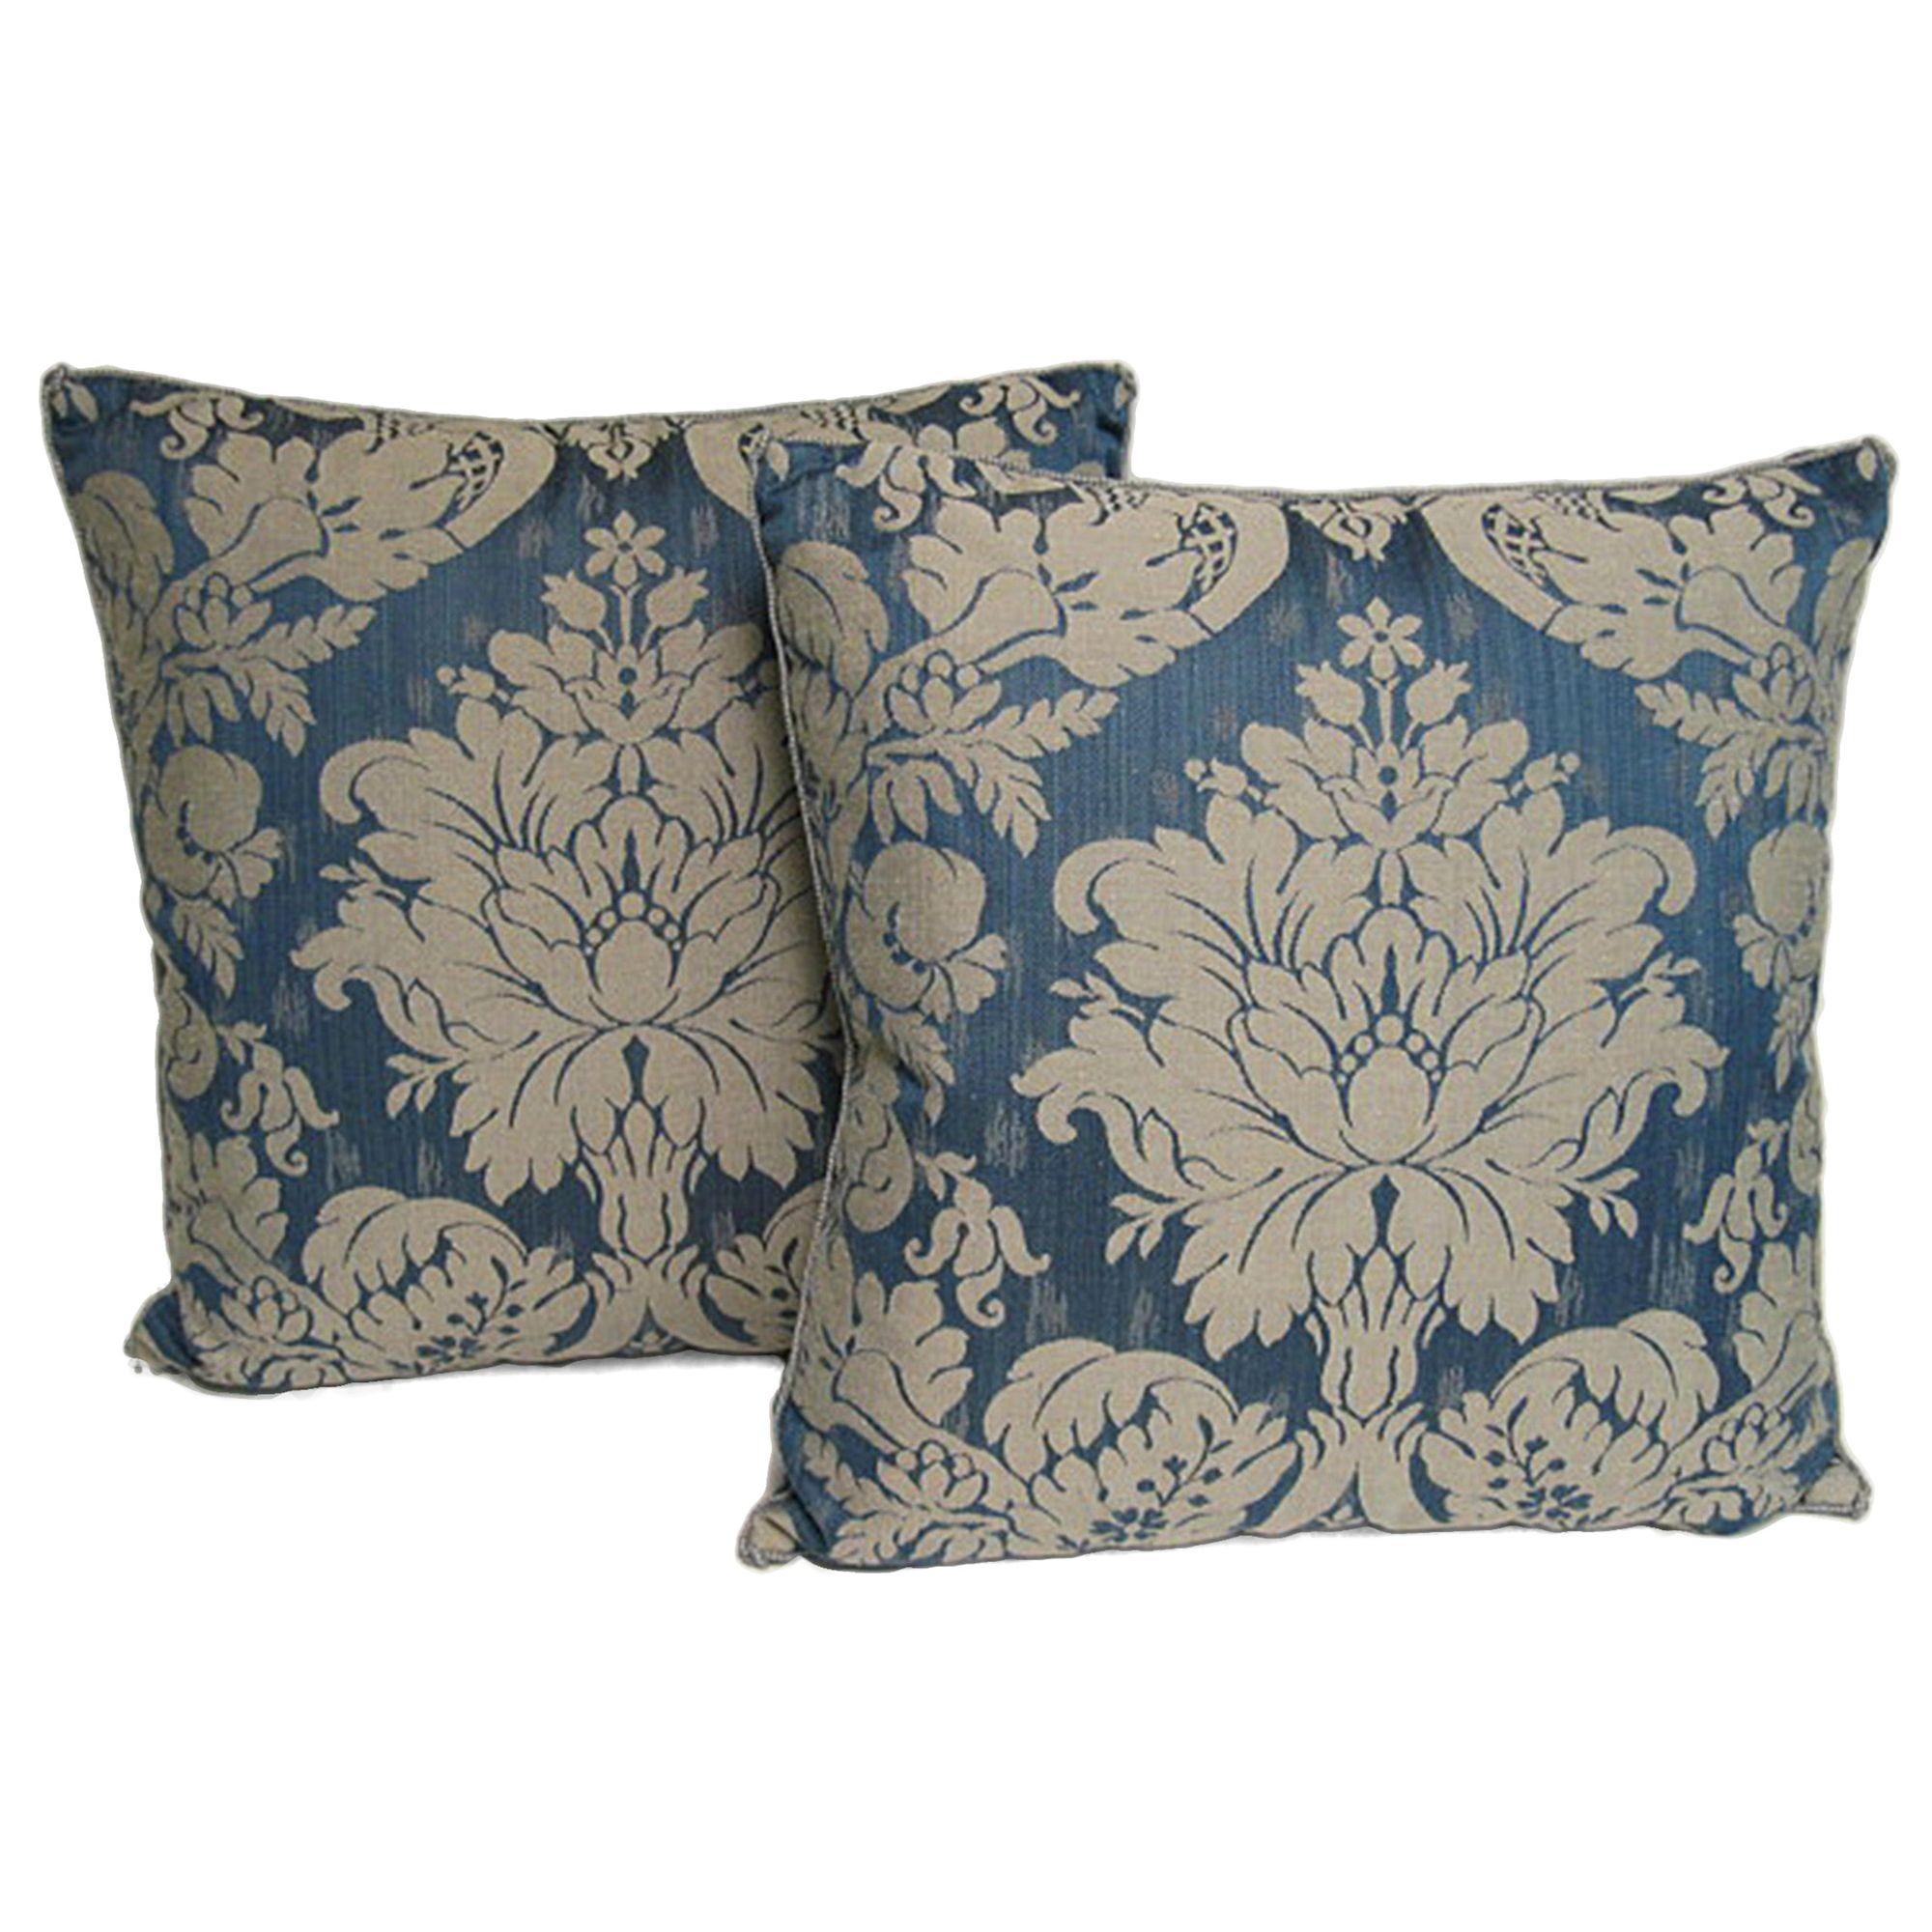 American Pair of Handmade Blue Damask Pillows with a Floral Pattern For Sale